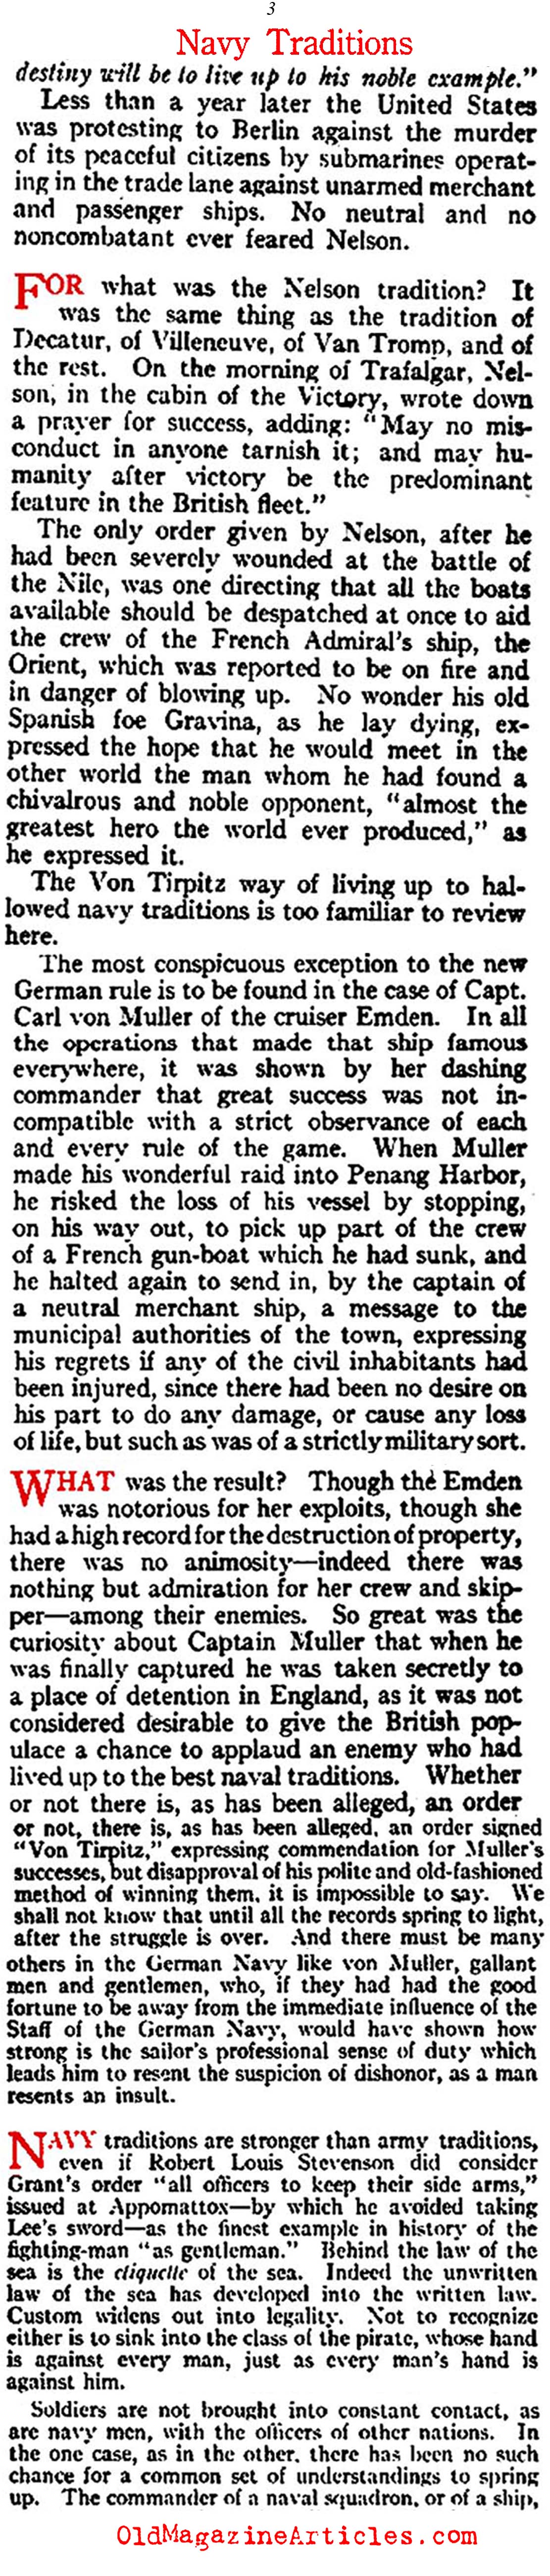 The <i>Lusitania</i> Attack and the Violation of Naval Traditions (Vanity Fair Magazine, 1915)